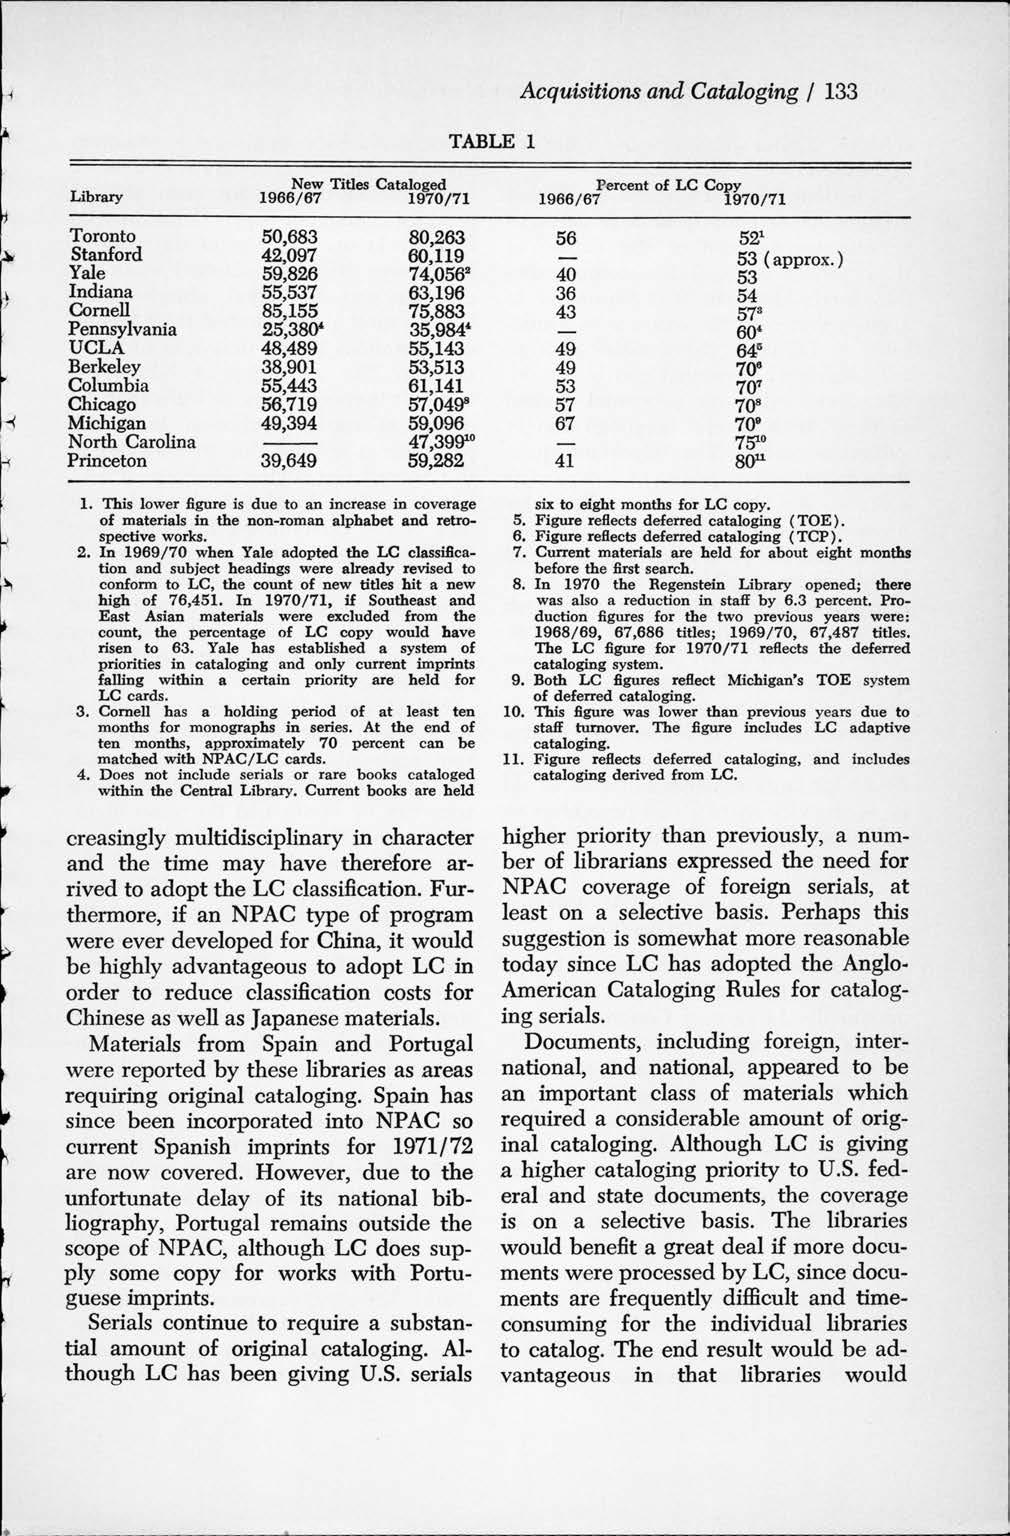 TABLE 1 Acquisitions and Cataloging I 133 Library New Titles Cataloged 1966/67 1970/71 Percent of LC Copy 1966/67 1970/71 - ~ J Toronto 50,683 80,263 Stanford 42,097 60,119 Yale 59,826 74,056 2